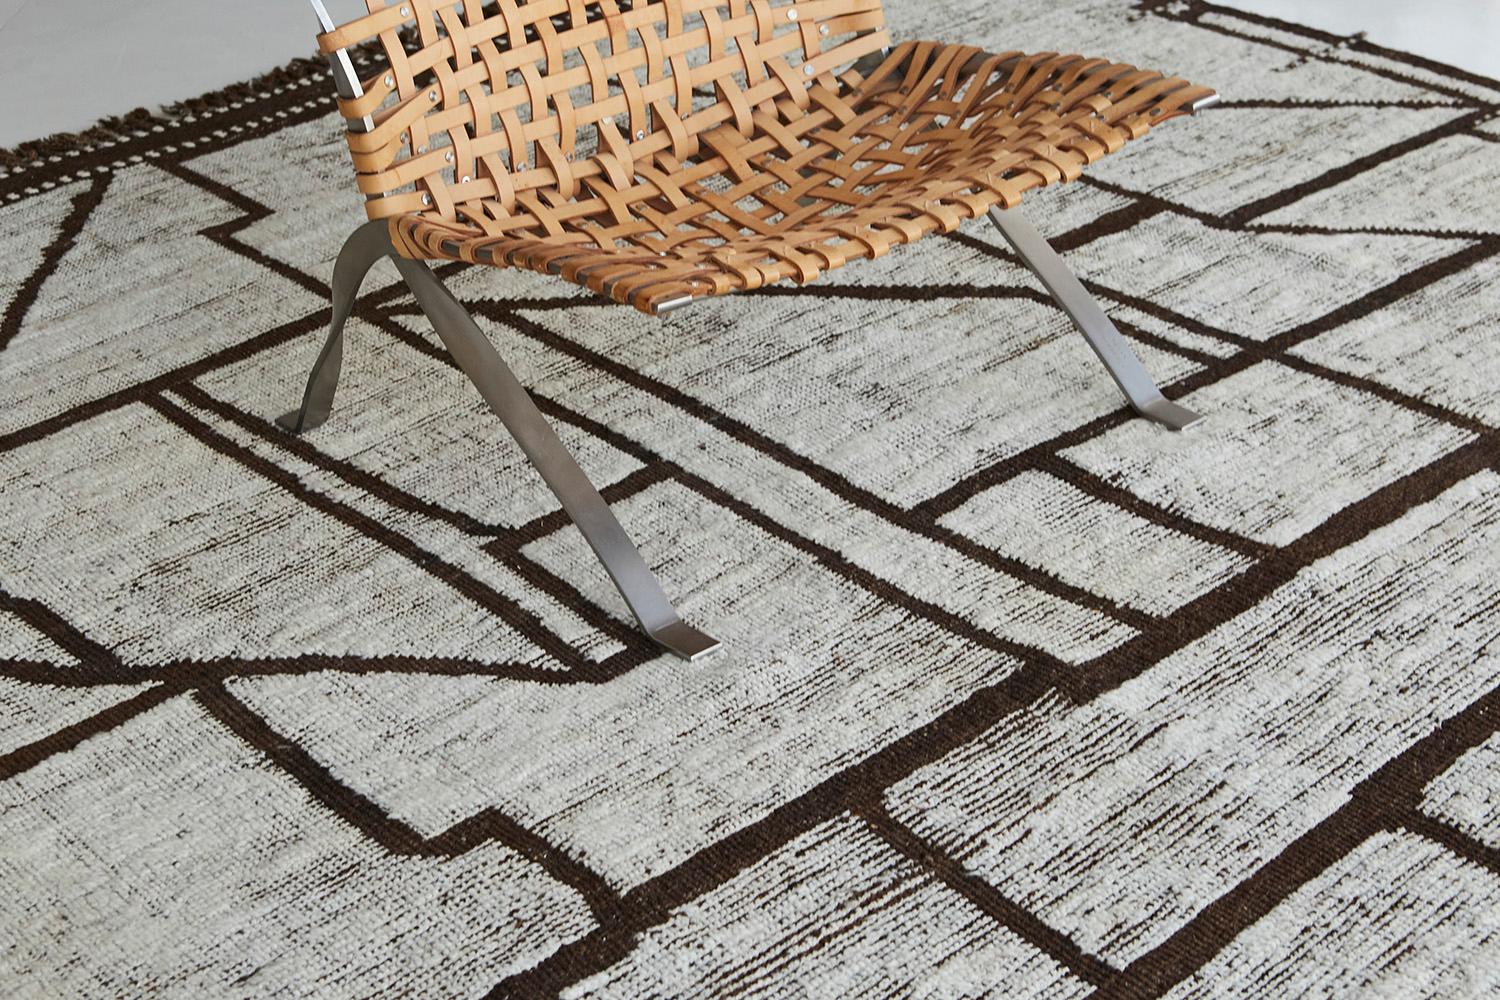 Benhaddou' is a beautifully textured rug with embossed detailing into an overall geometric and contemporary design. Linework moving irregularly brings movement and is inspired by the Atlas Mountains in Morocco for the modern design world. The rug's